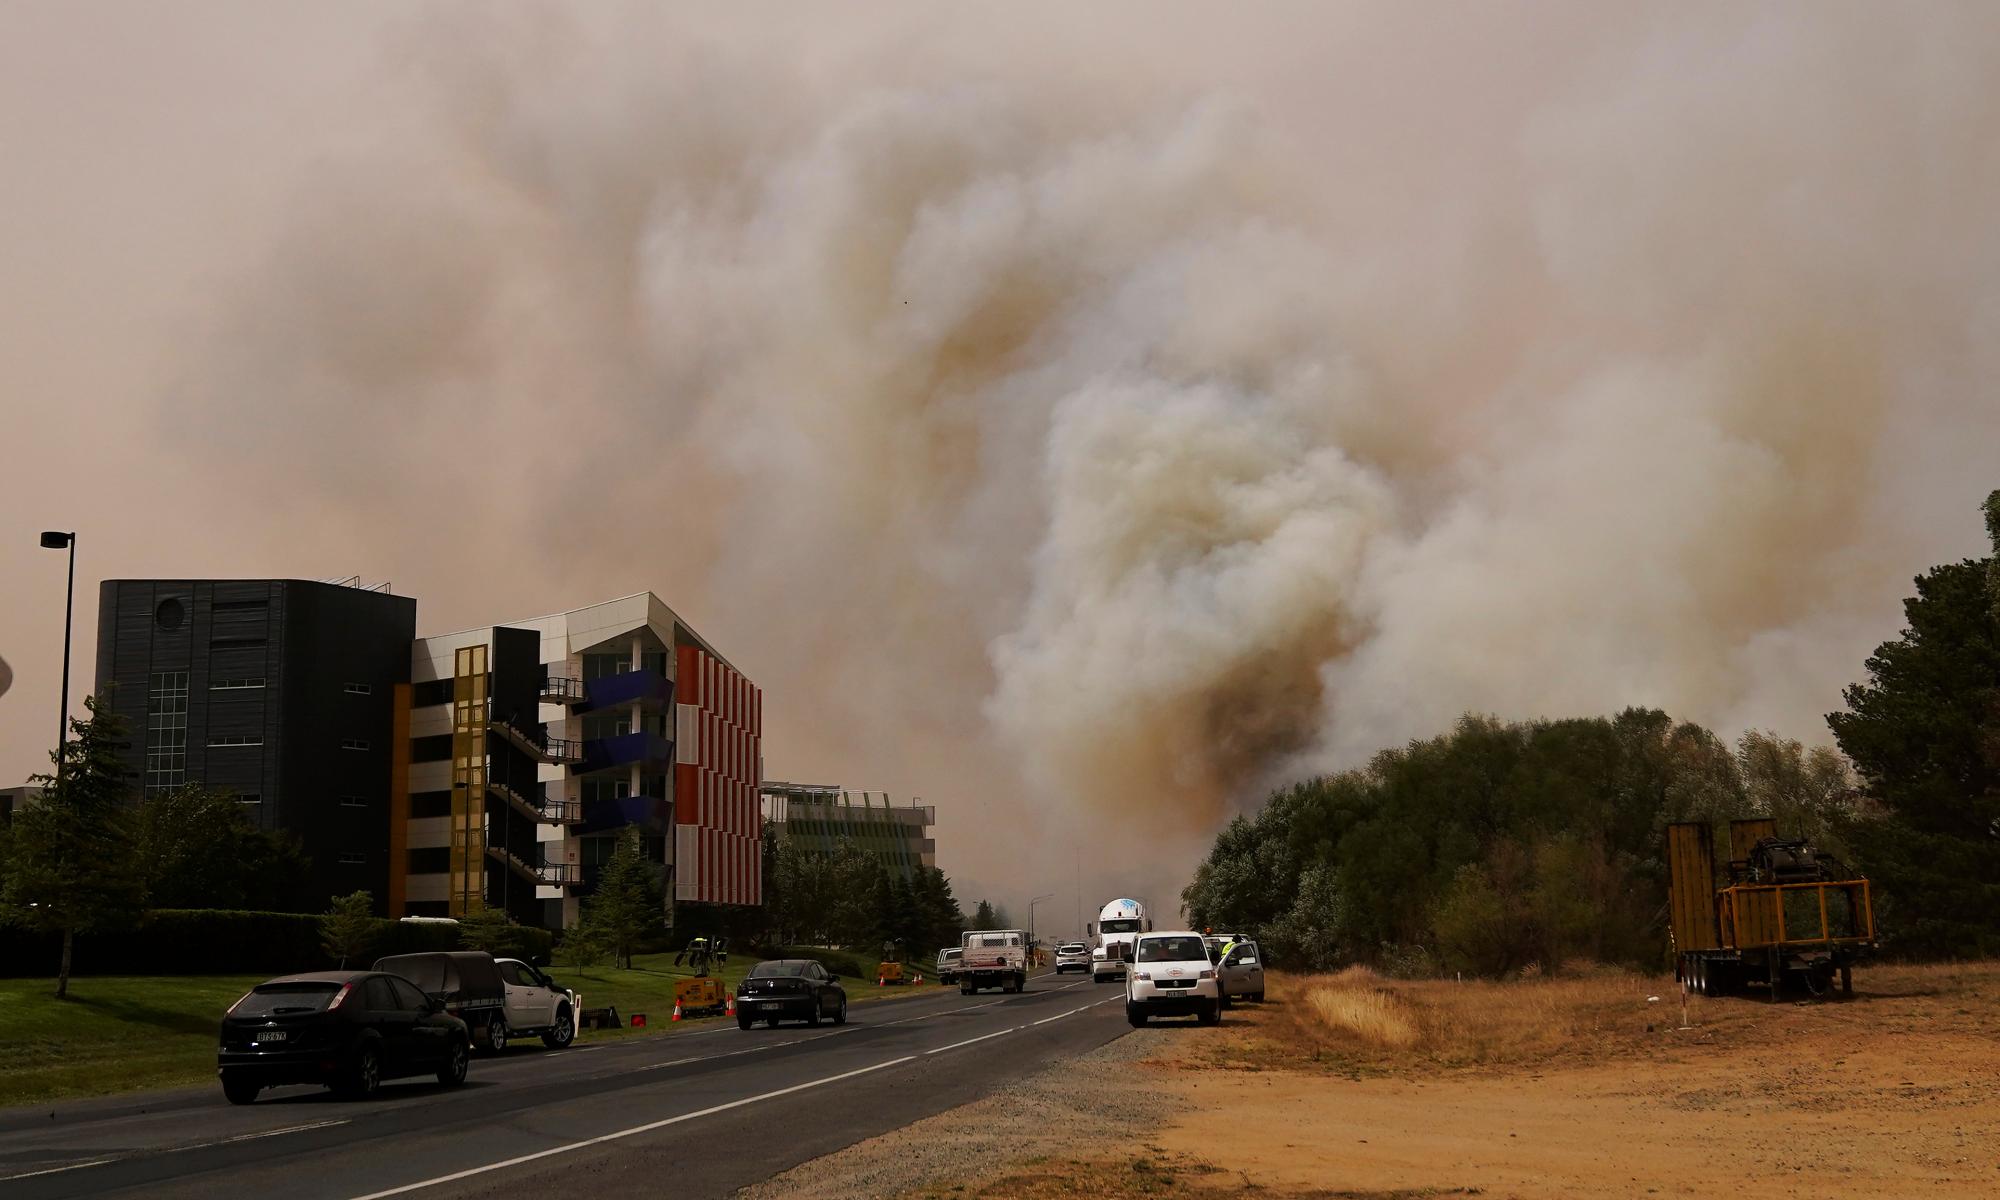 Australia fires live: Canberra airport closed, reports of air tanker crash in NSW bushfires – latest updates